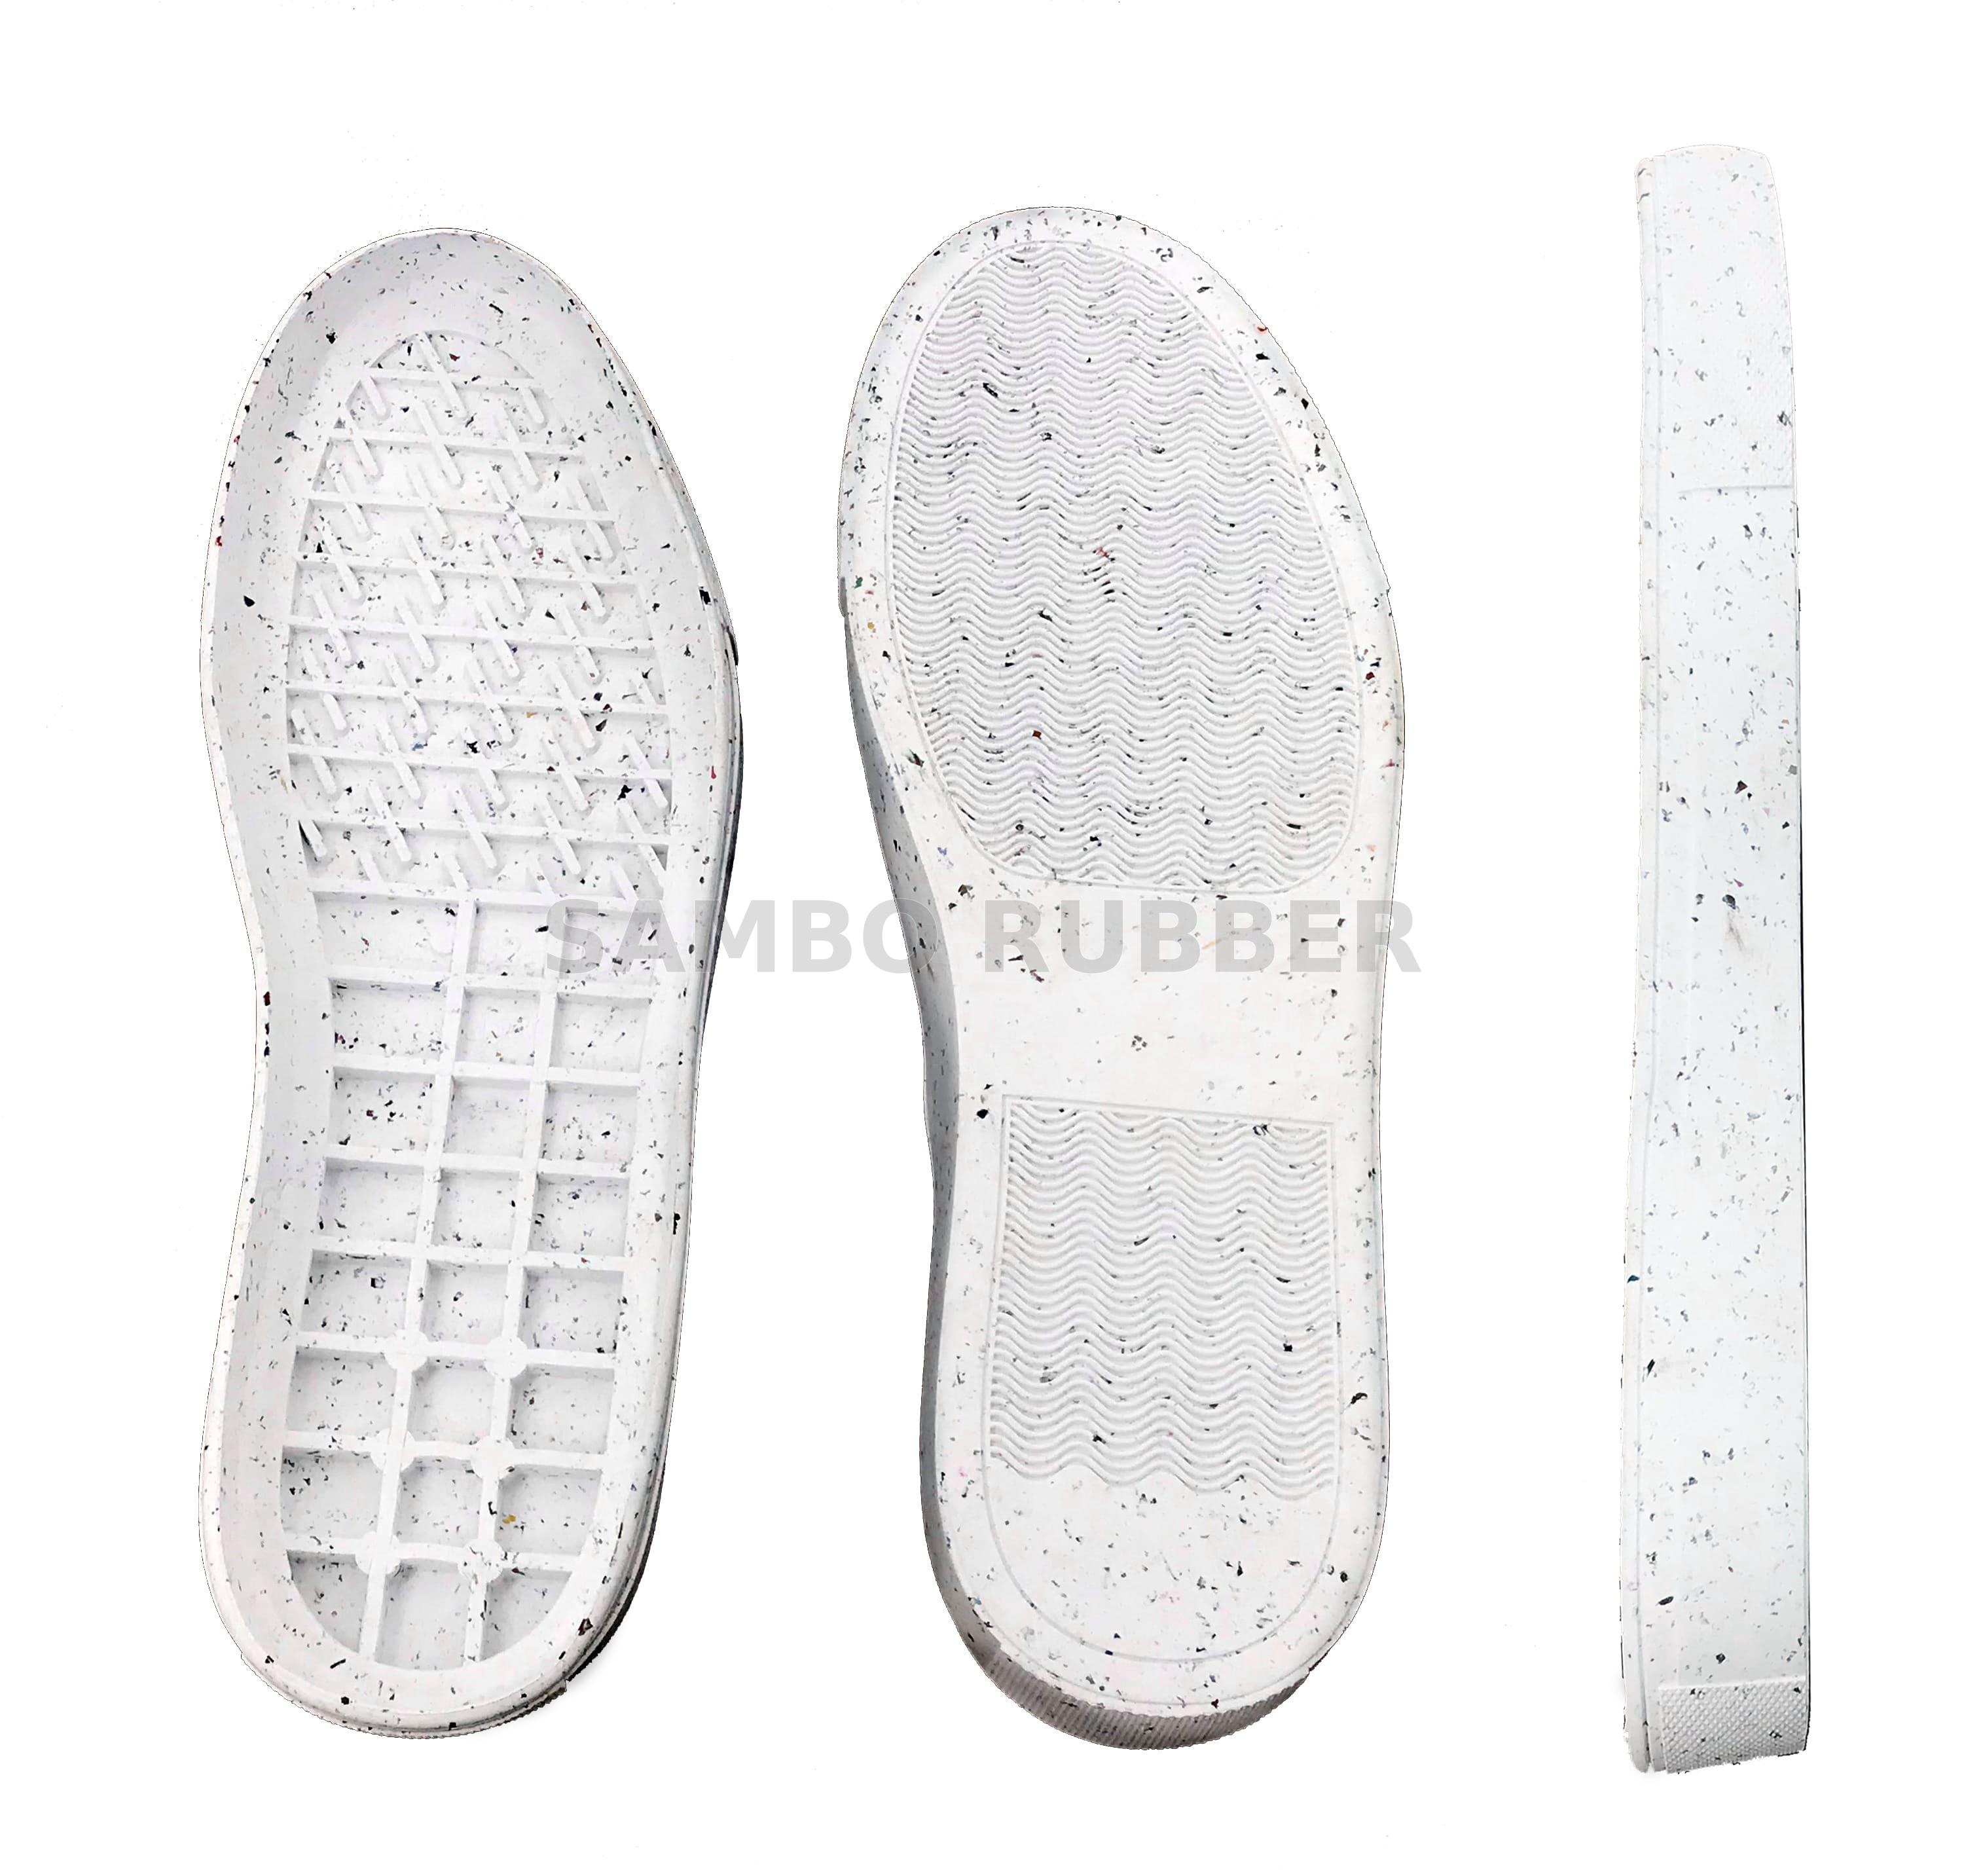 Recycled Rubber Soles | Taiwantrade.com